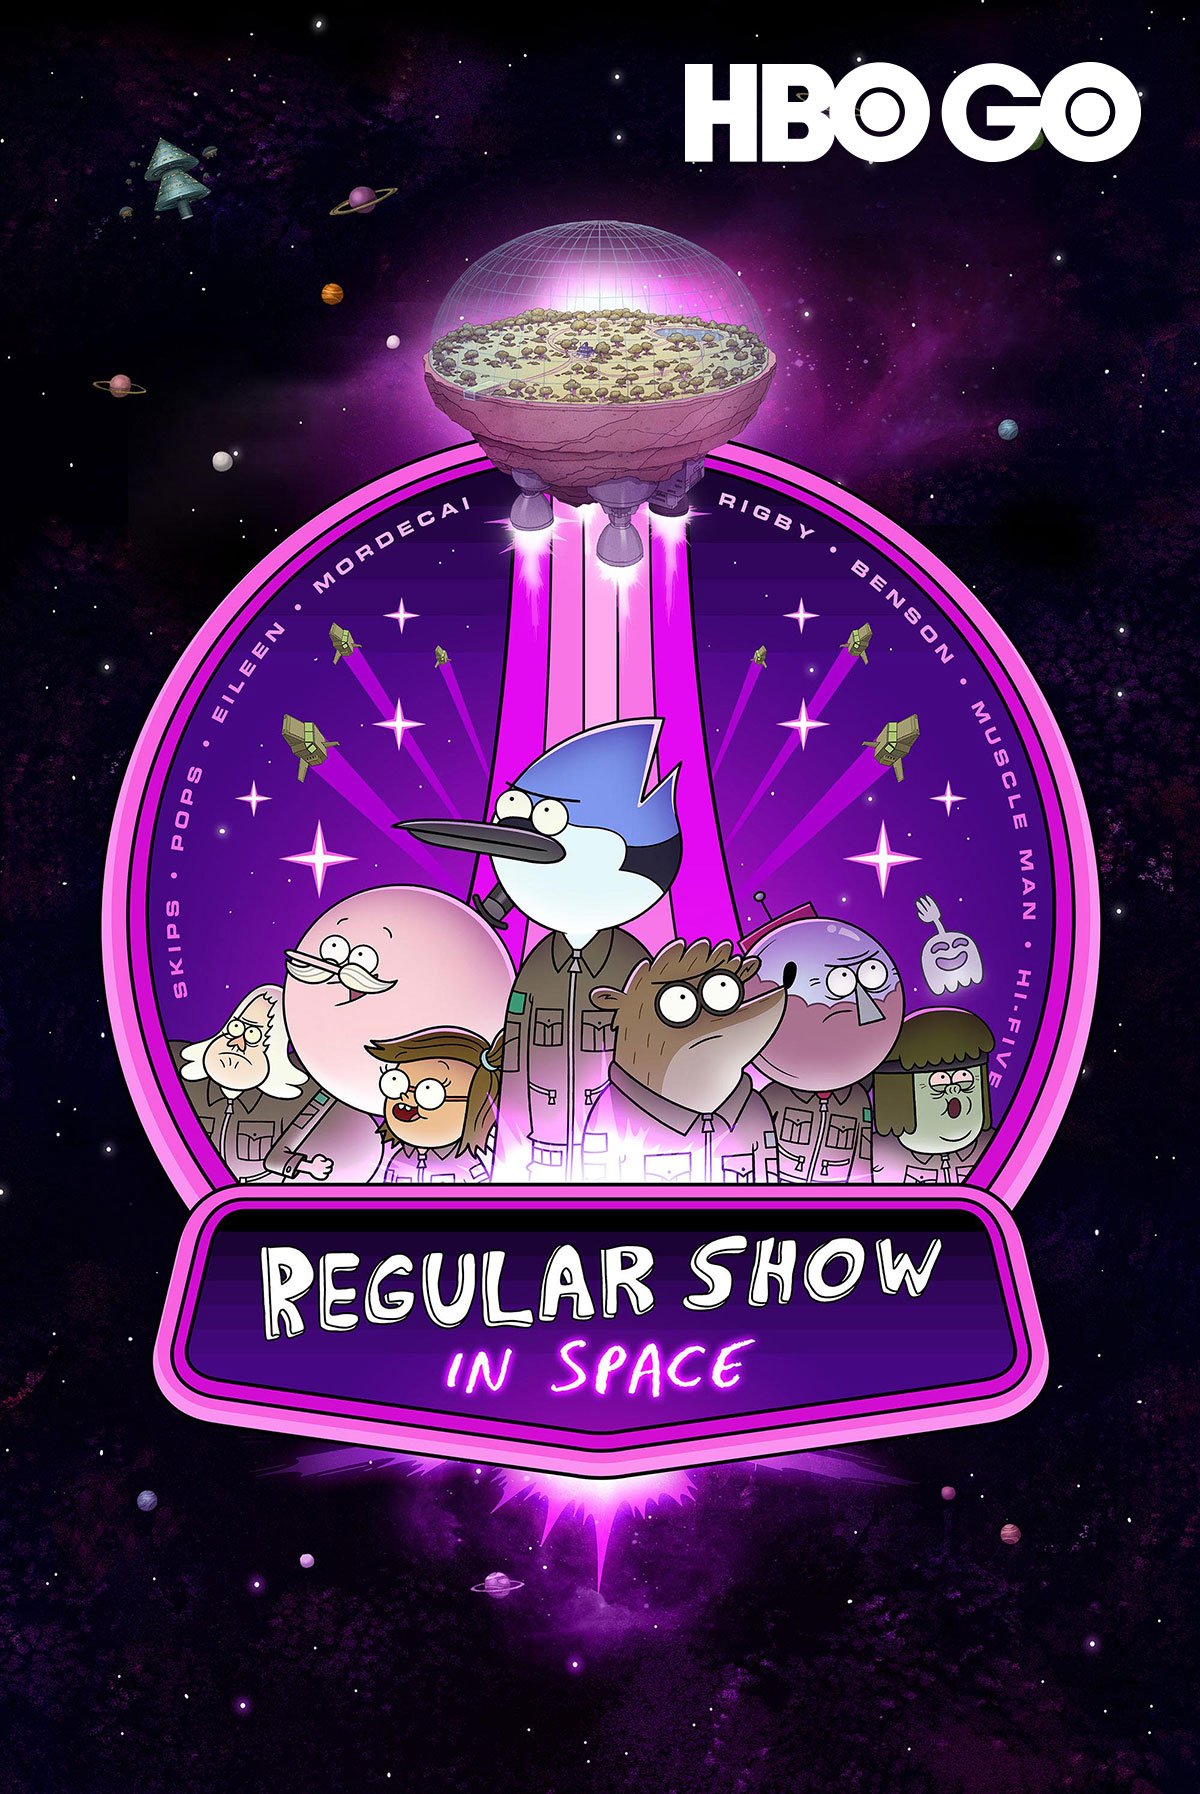 Now Player - Regular Show: The Movie